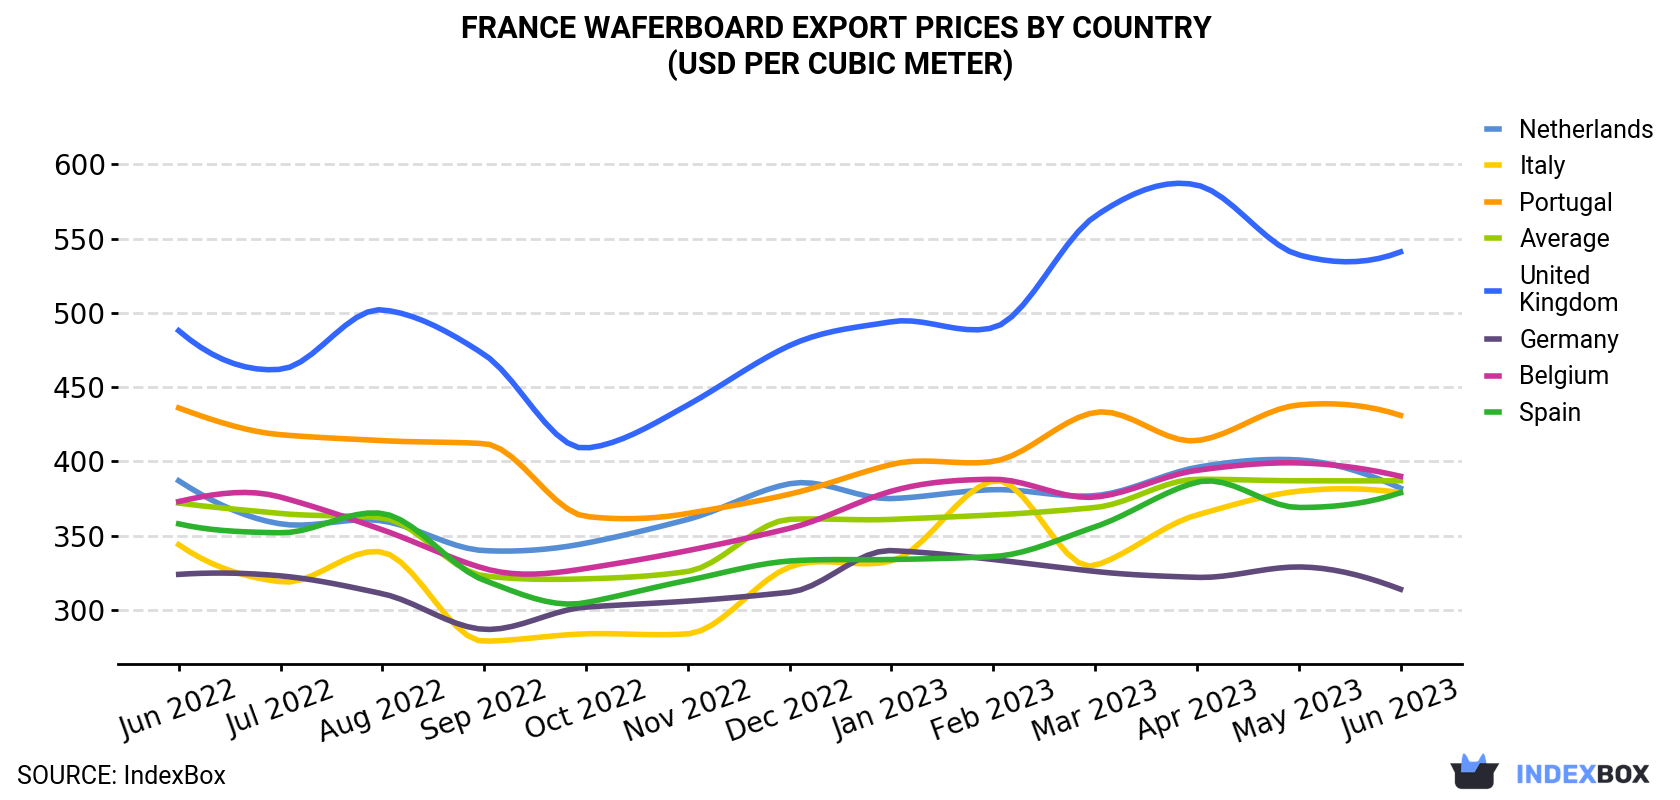 France Waferboard Export Prices By Country (USD Per Cubic Meter)